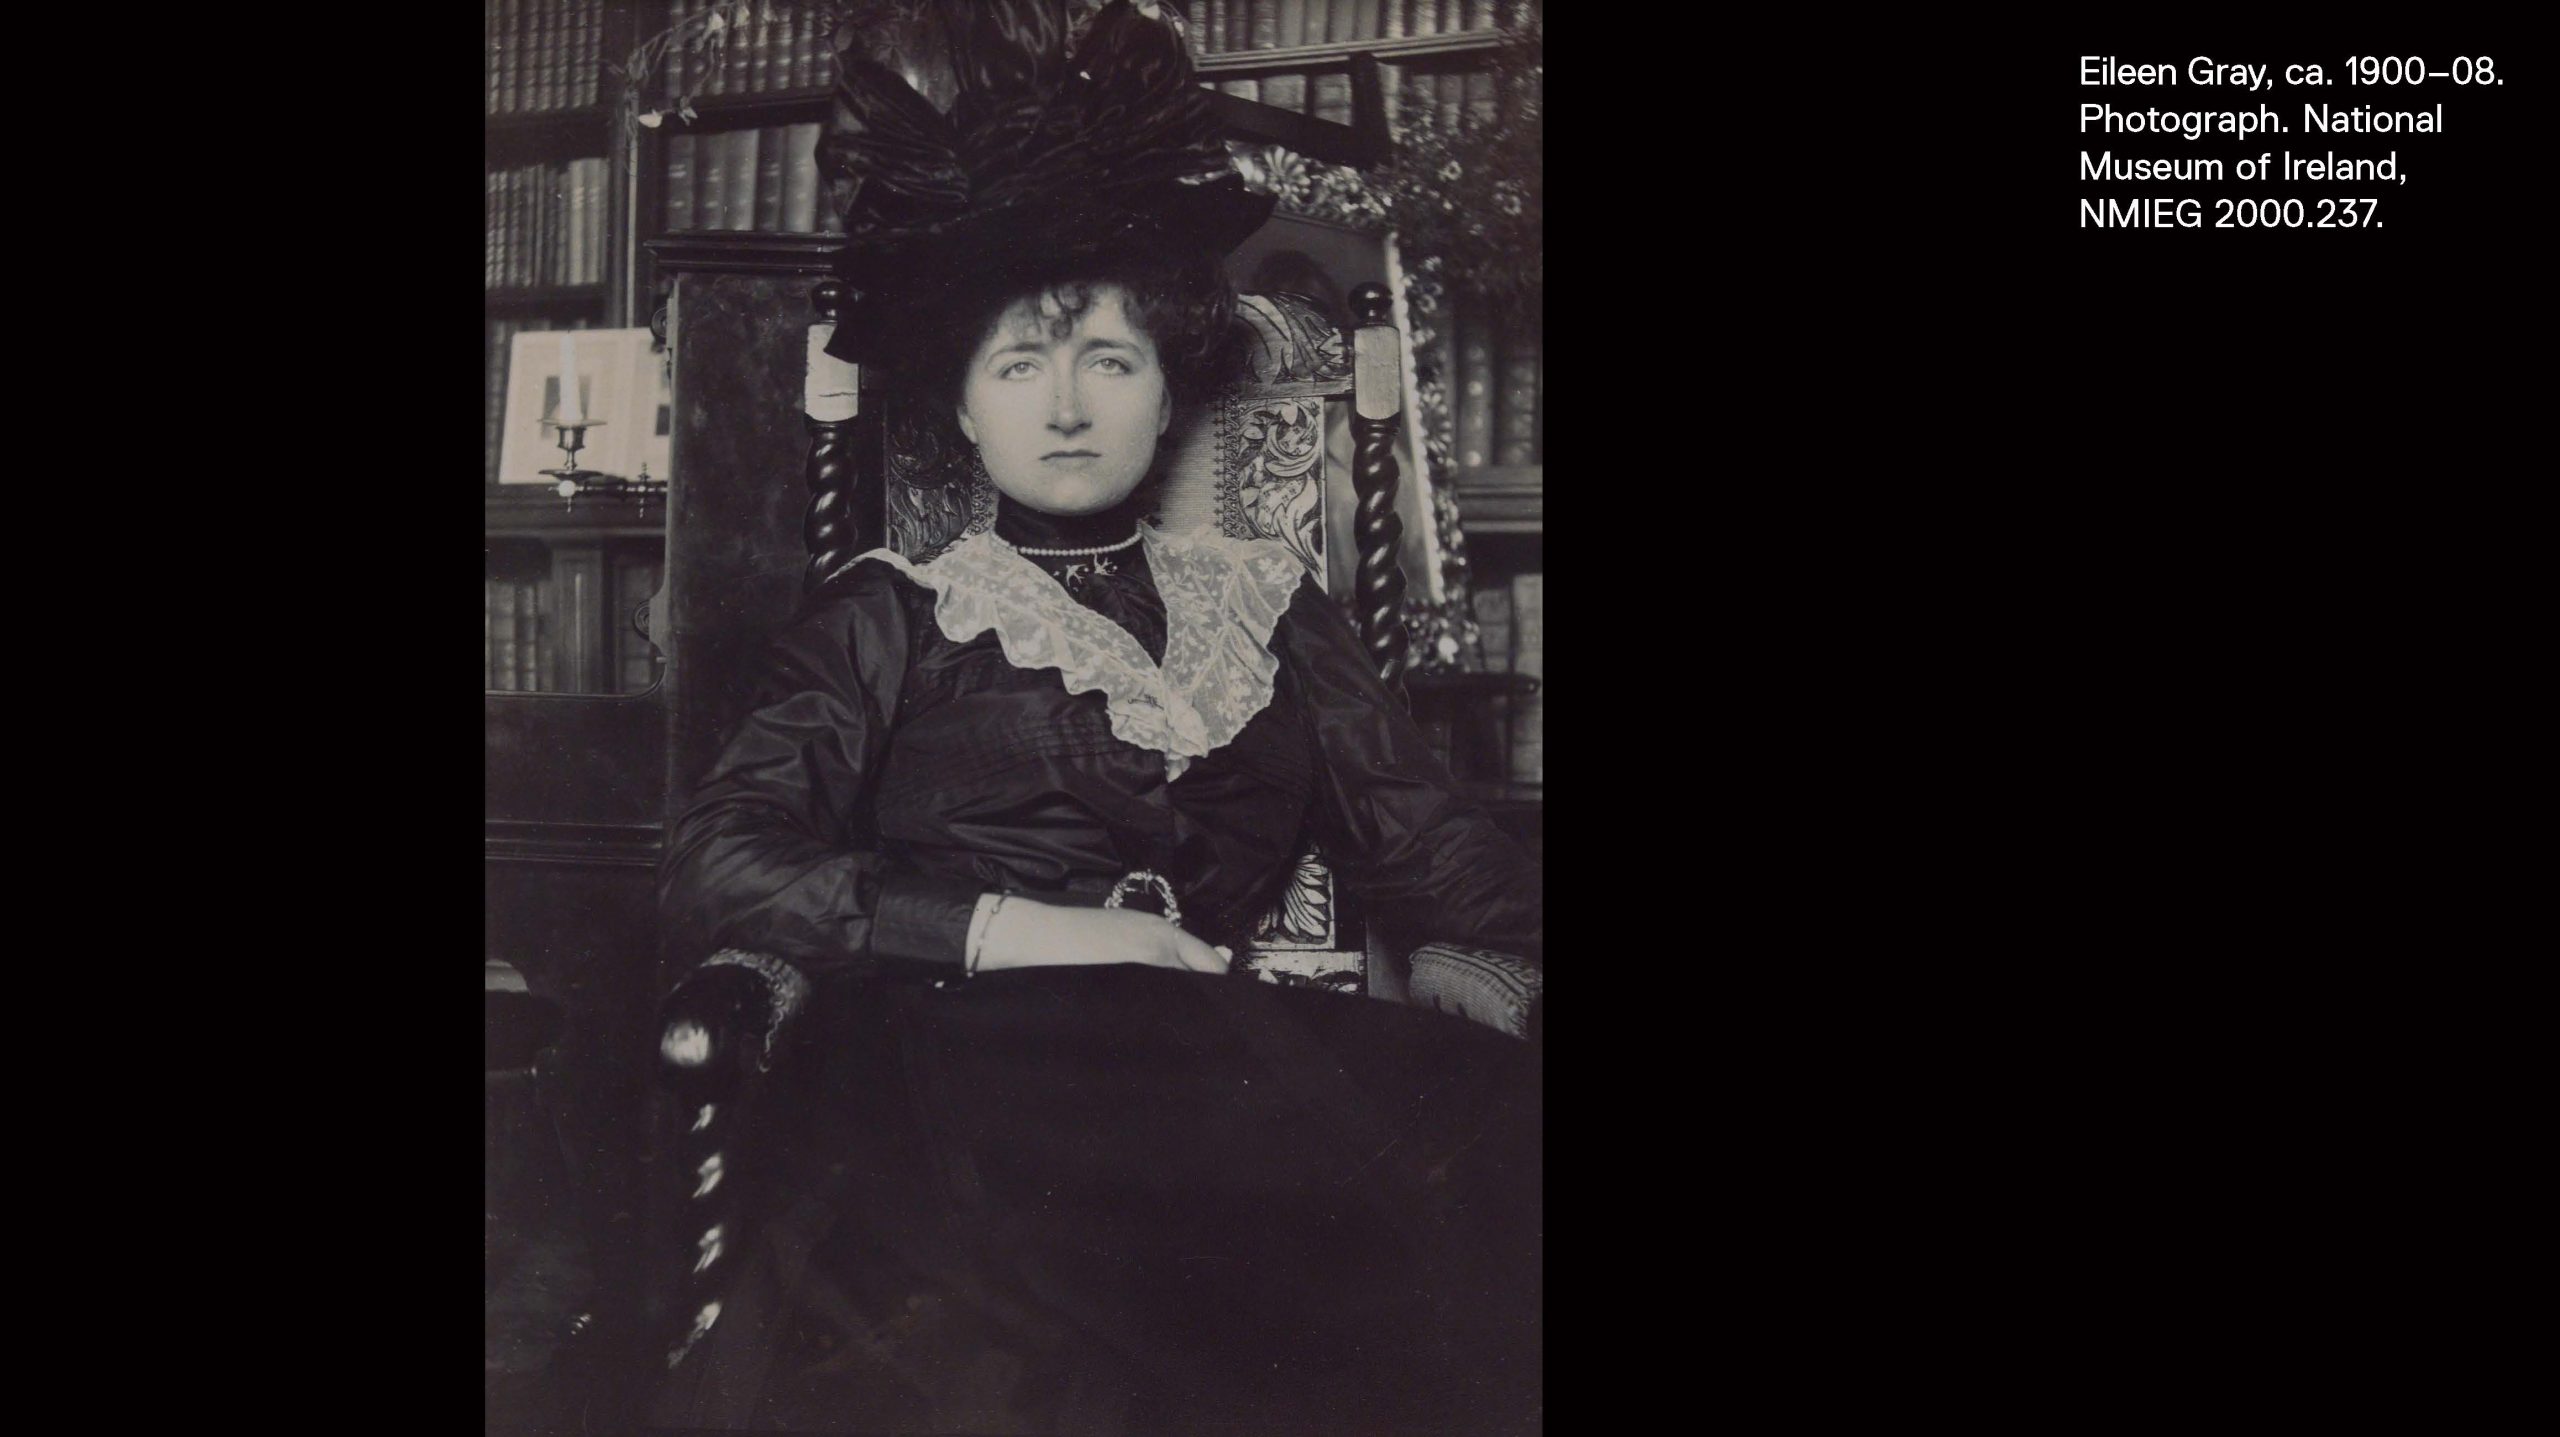 Eileen Gray in Edwardian dress and a dark hat seated in a high-backed chair staring directly at the camera.